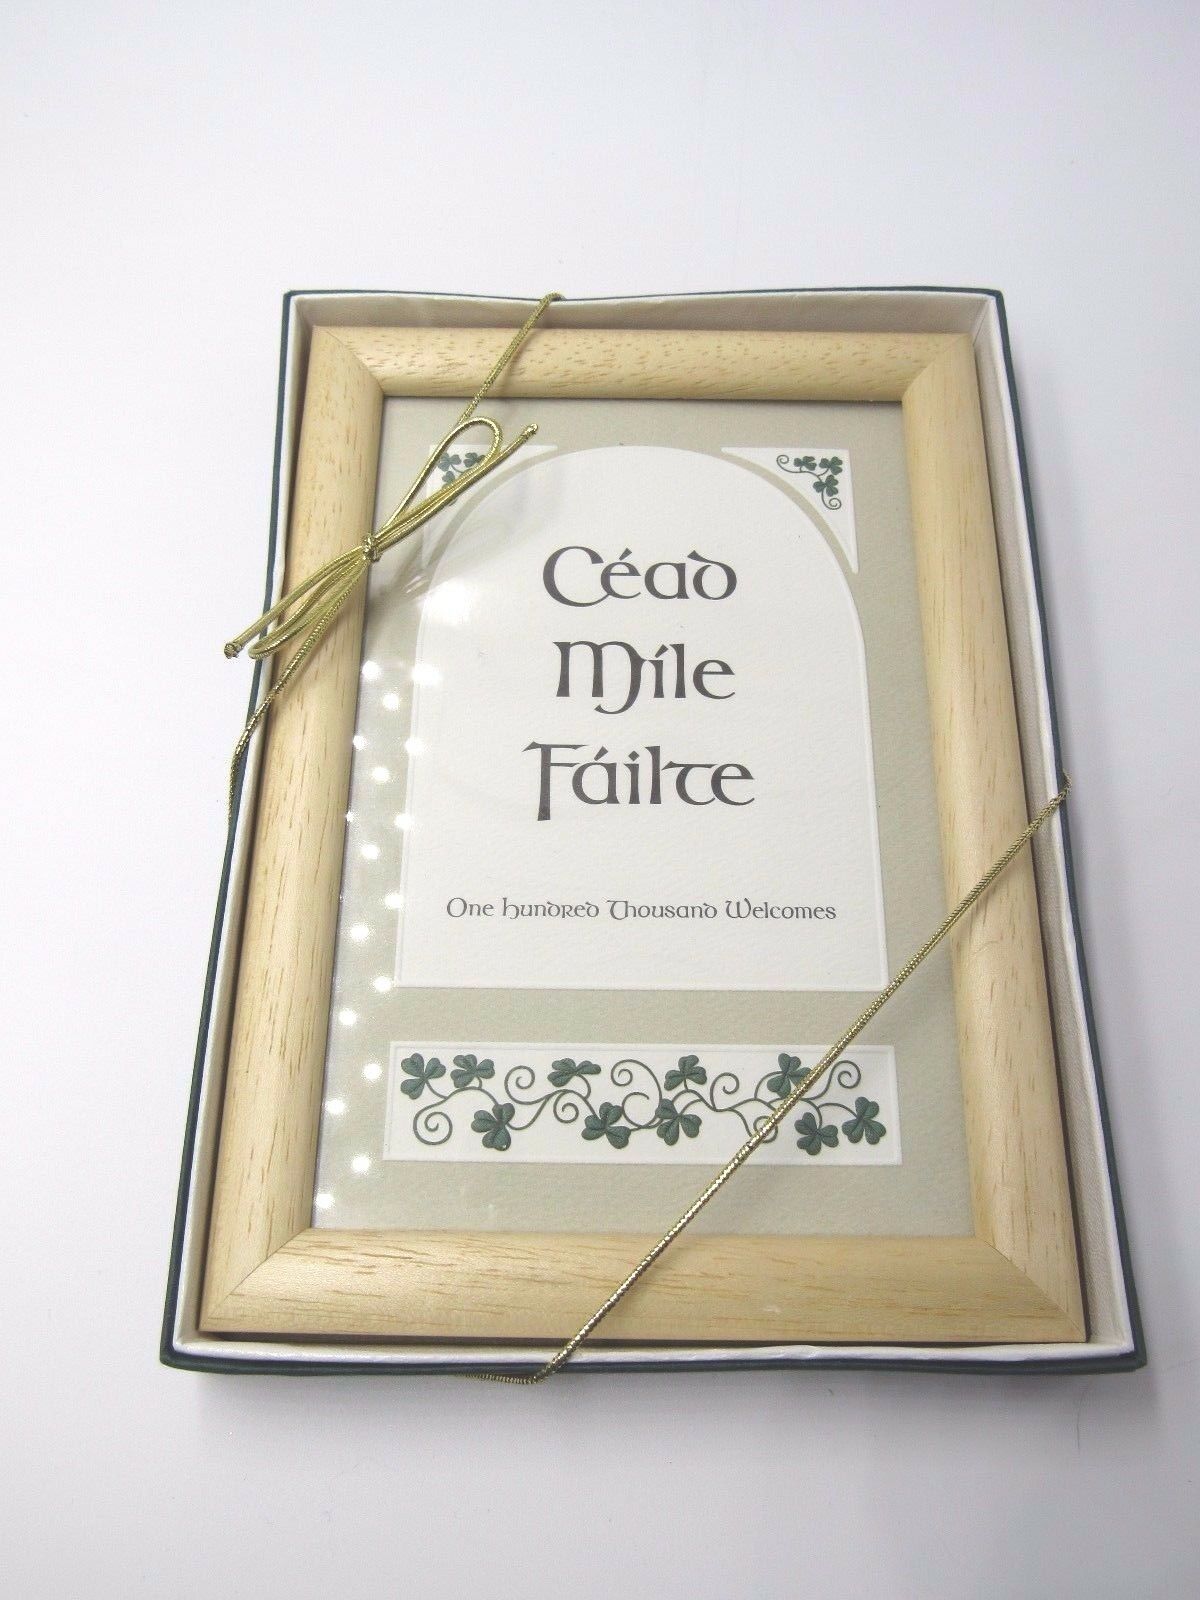 Irish Cead Mile Failte One Hundred Thousand Welcomes Framed New In Box